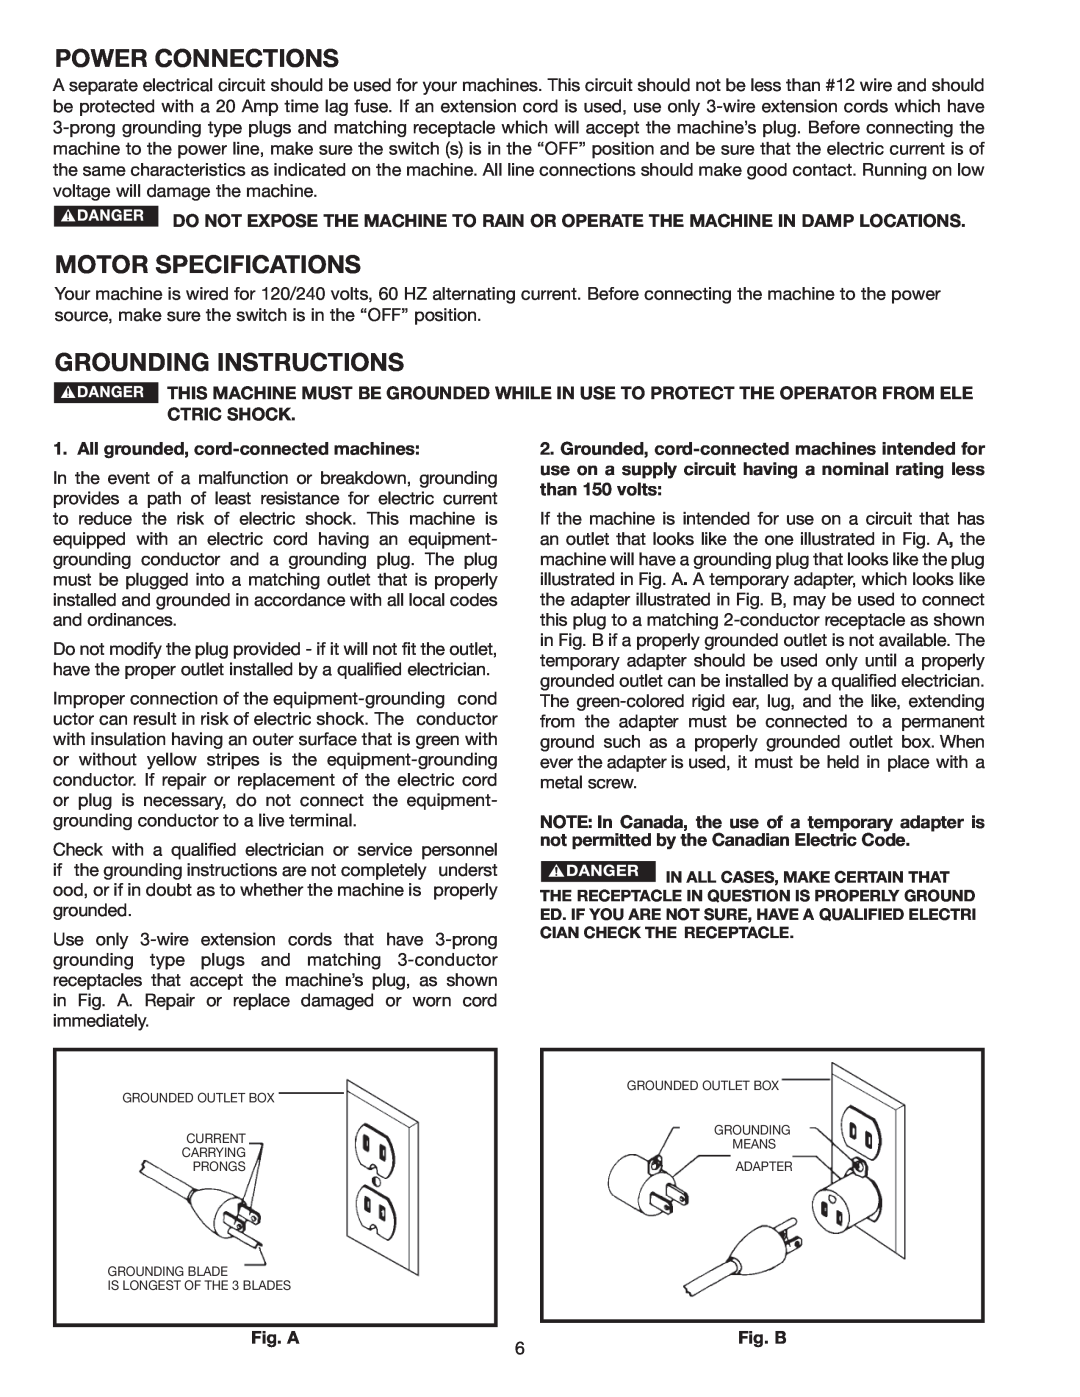 Delta 36-978 instruction manual Power Connections, Motor Specifications, Grounding Instructions 